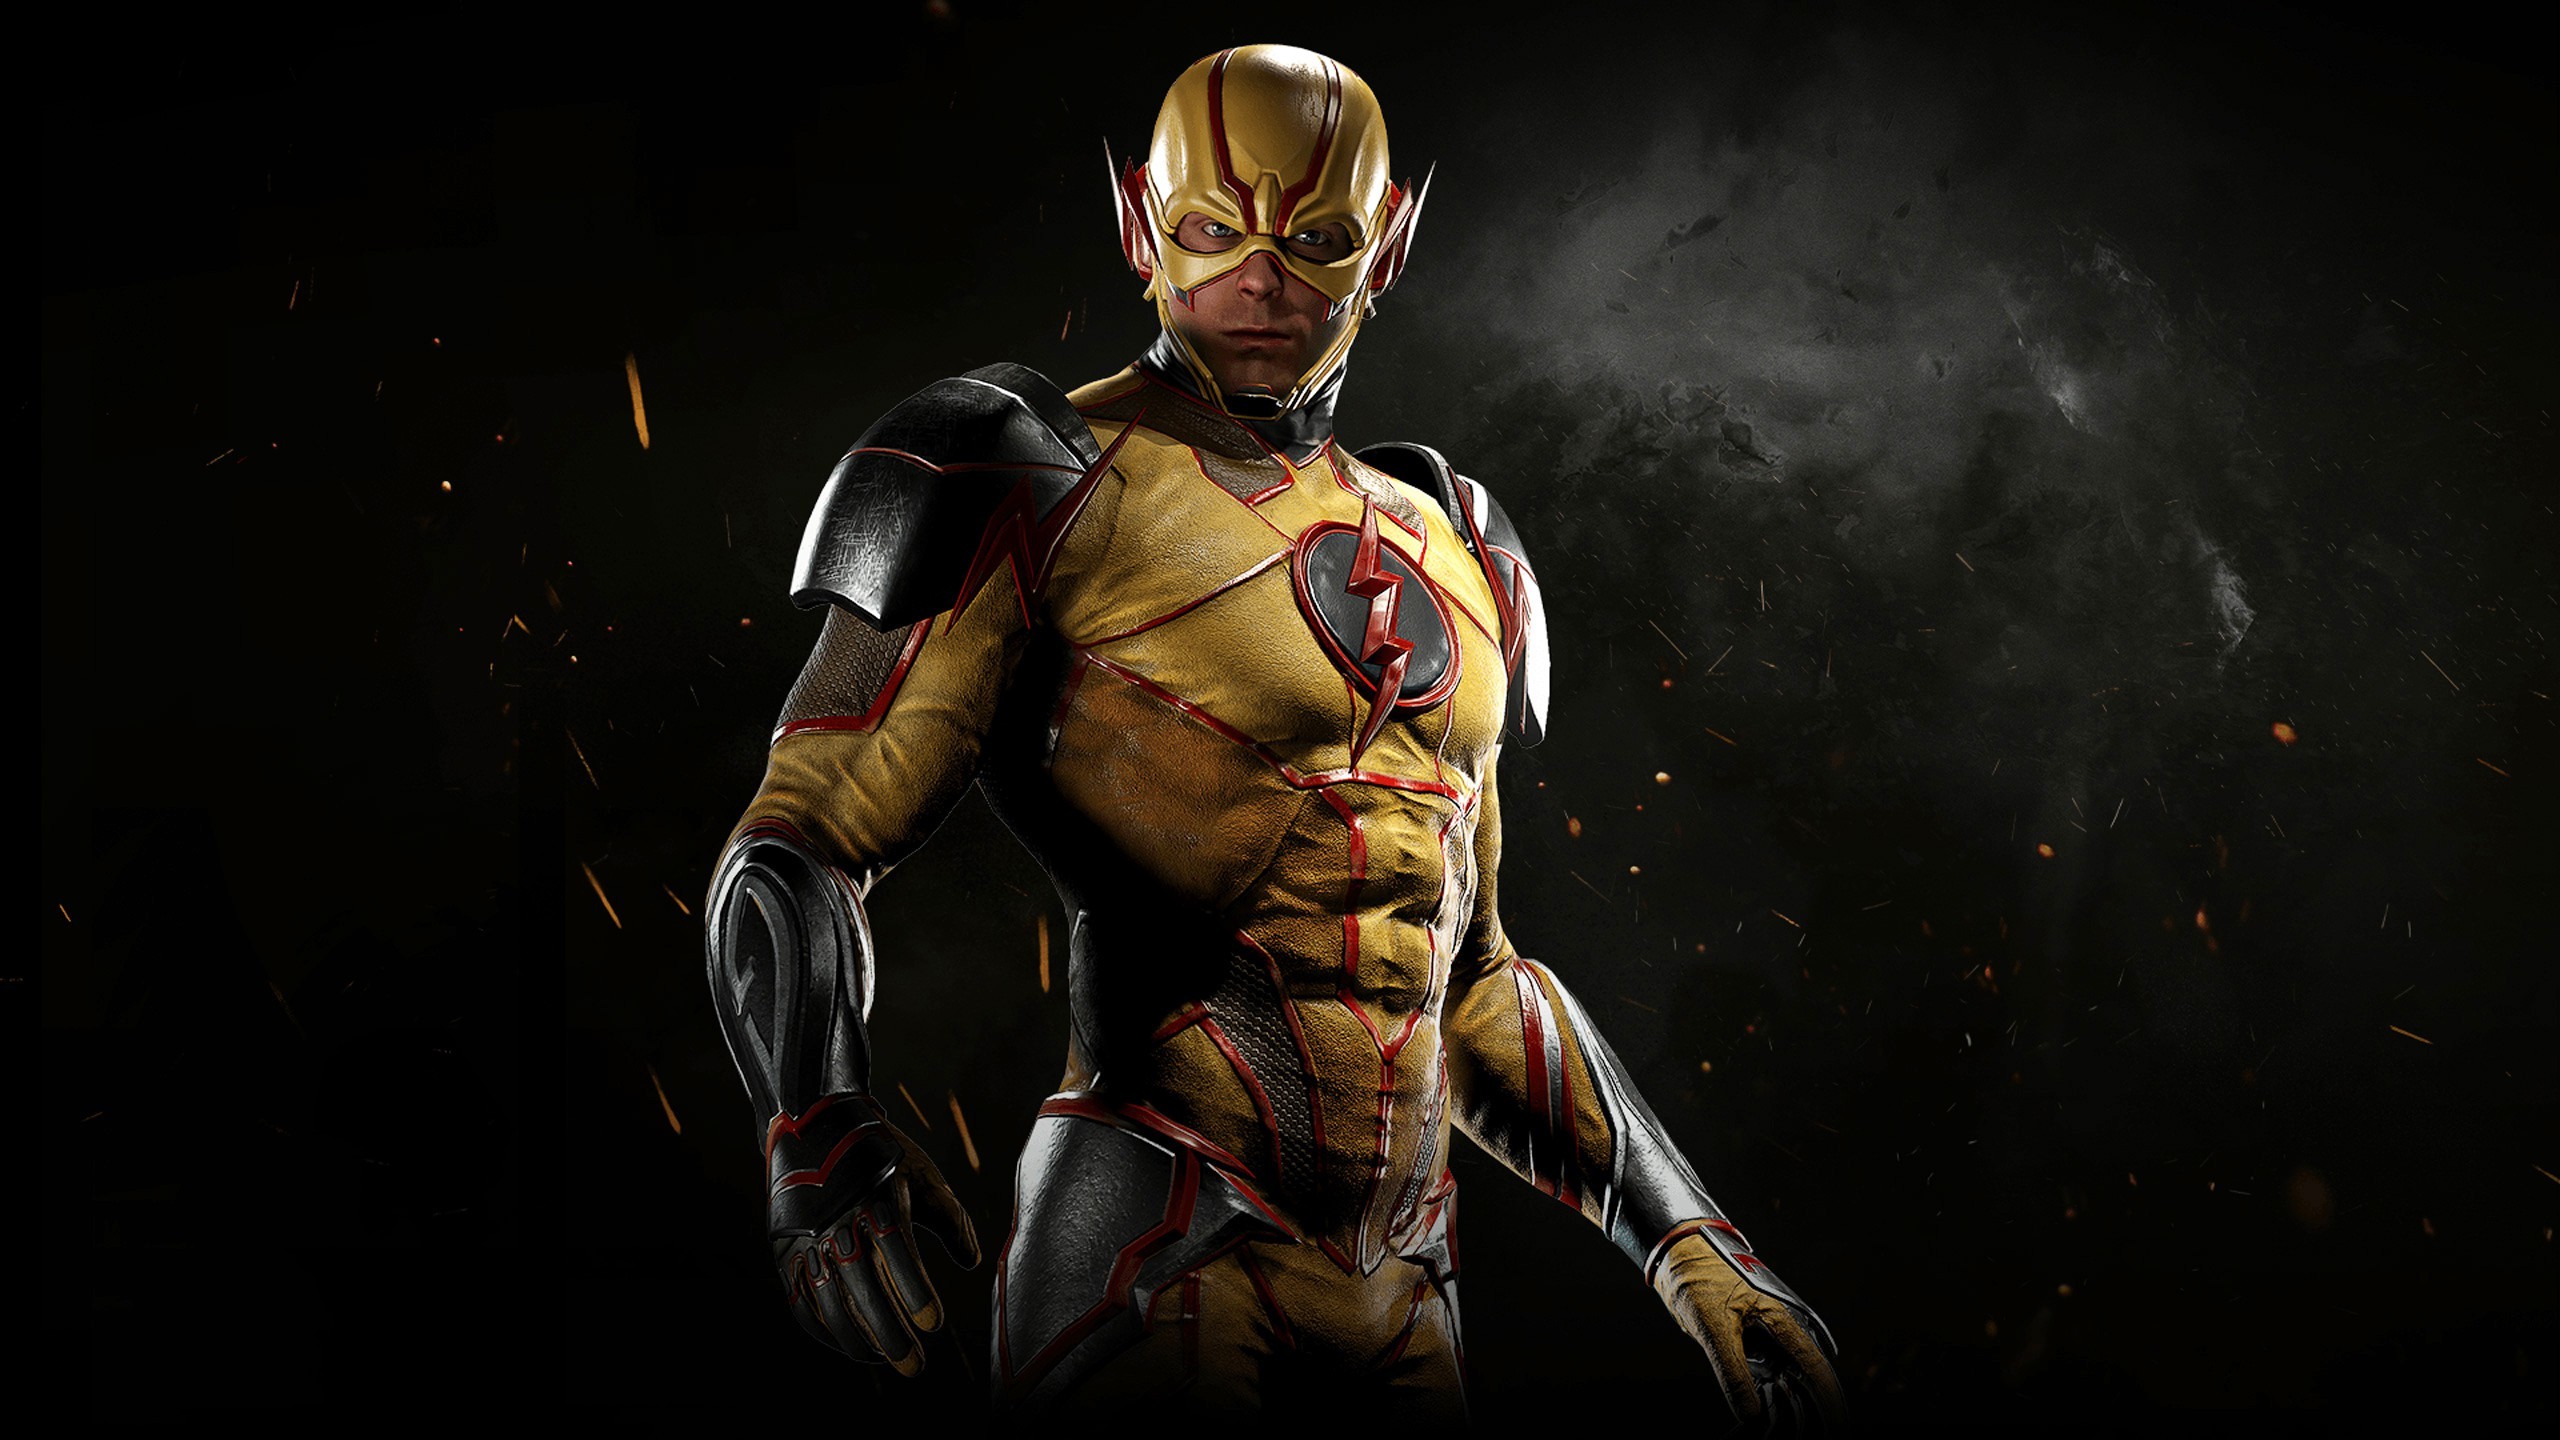 Injustice 2 Is that Wally West as Kid Flash in the second story